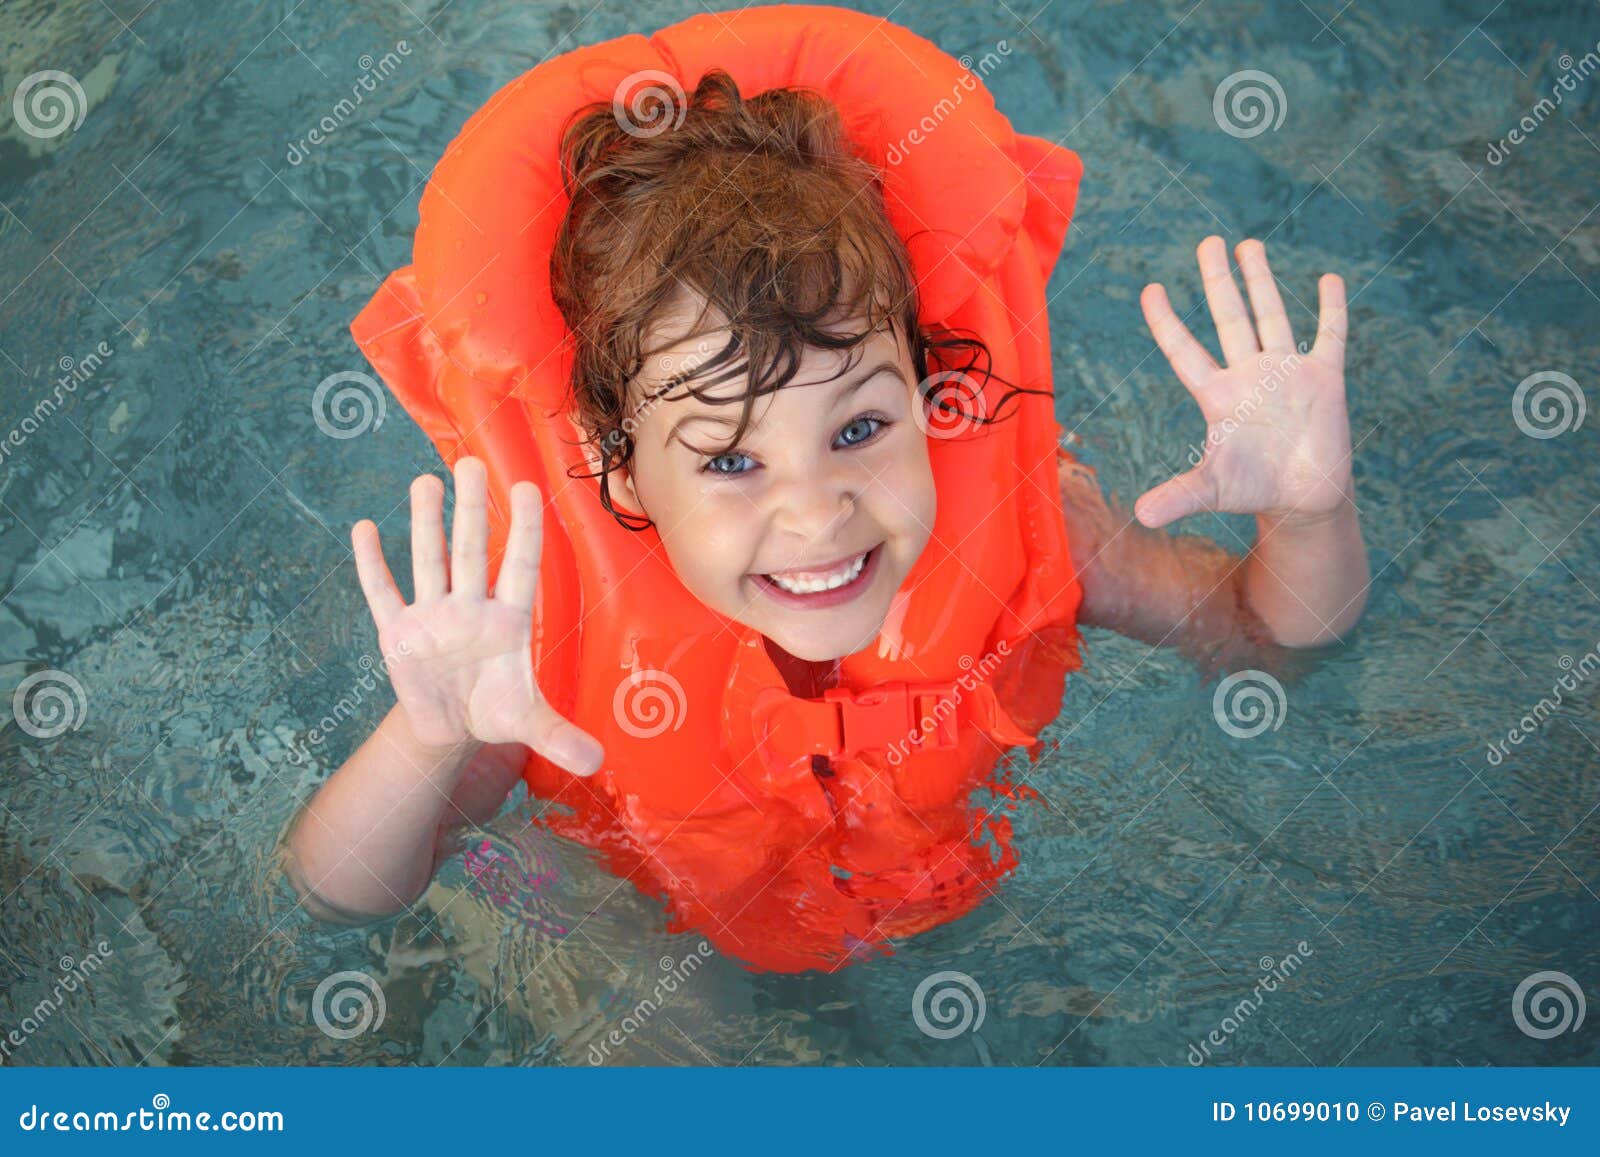 little girl in inflatable waistcoat in pool